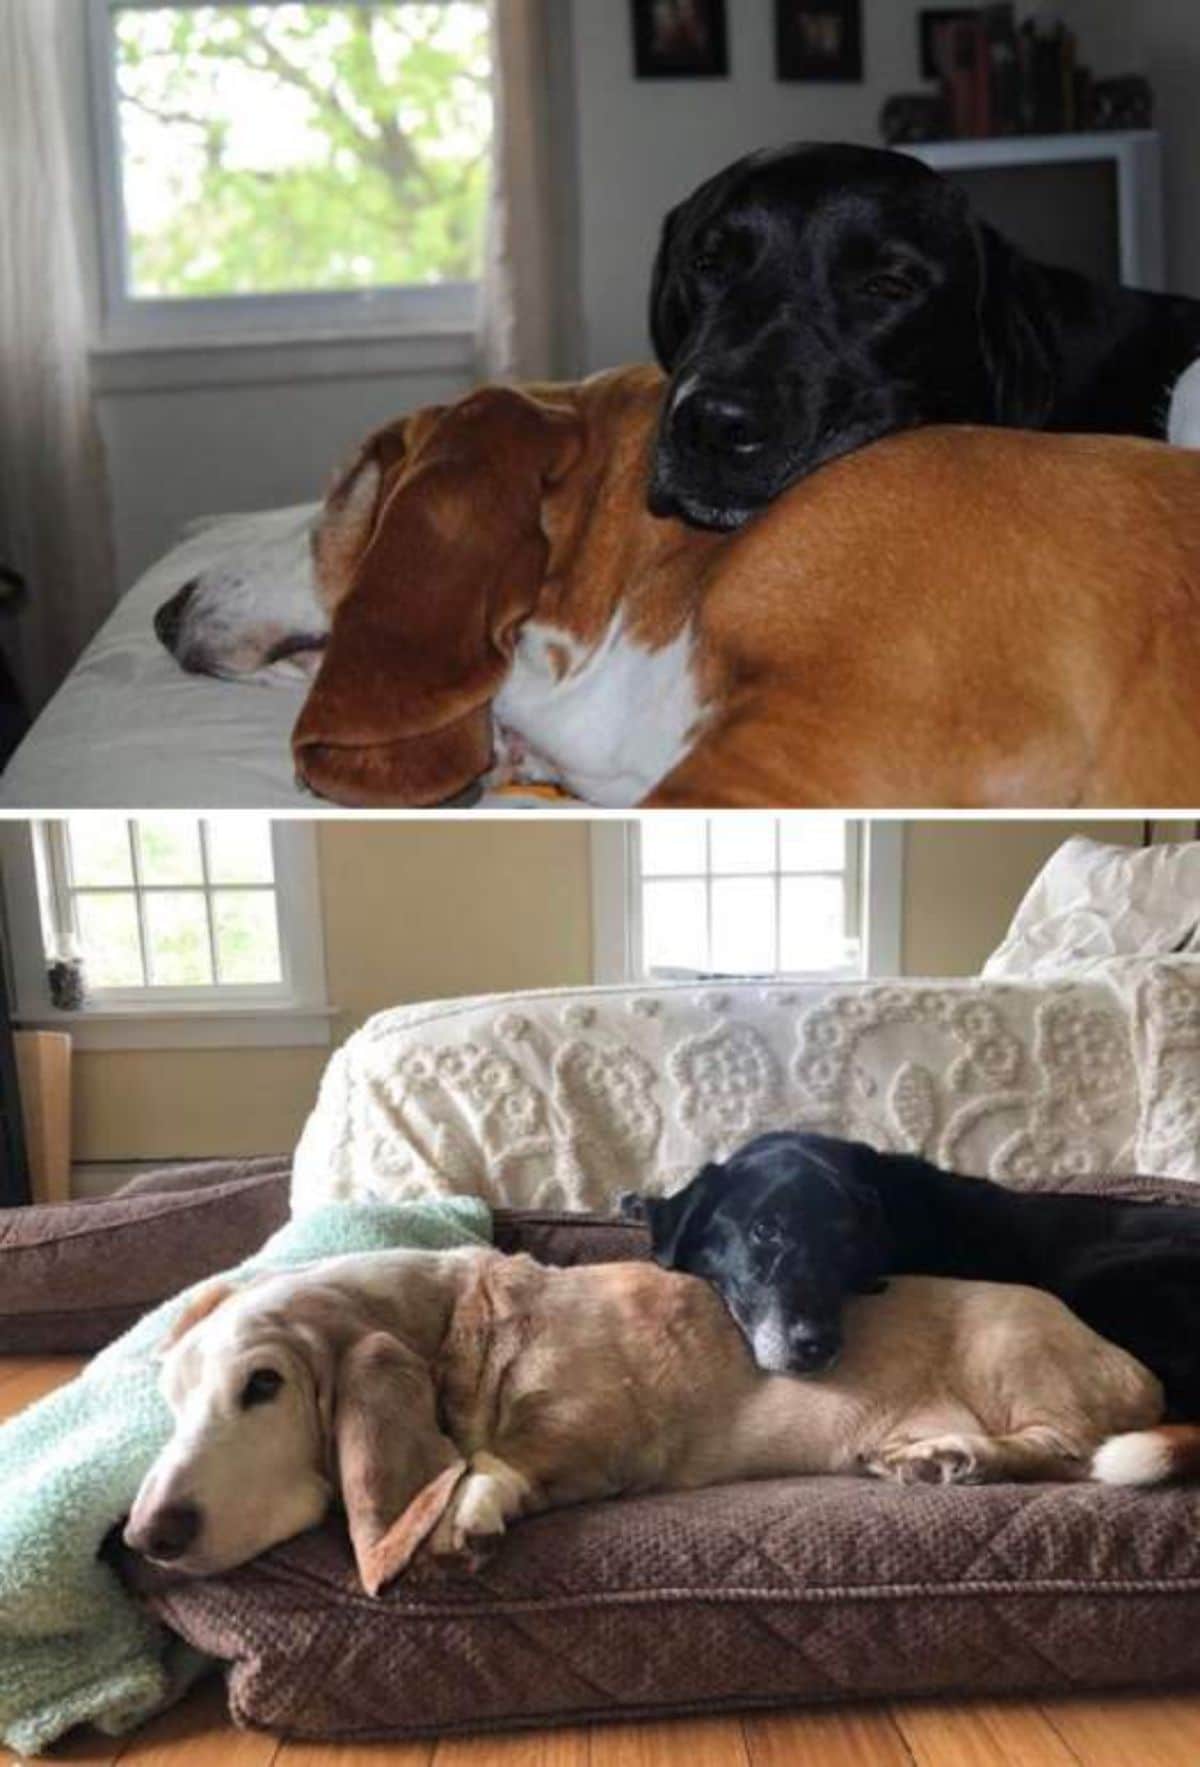 two photos of a black dog sleeping on a brown and white dog